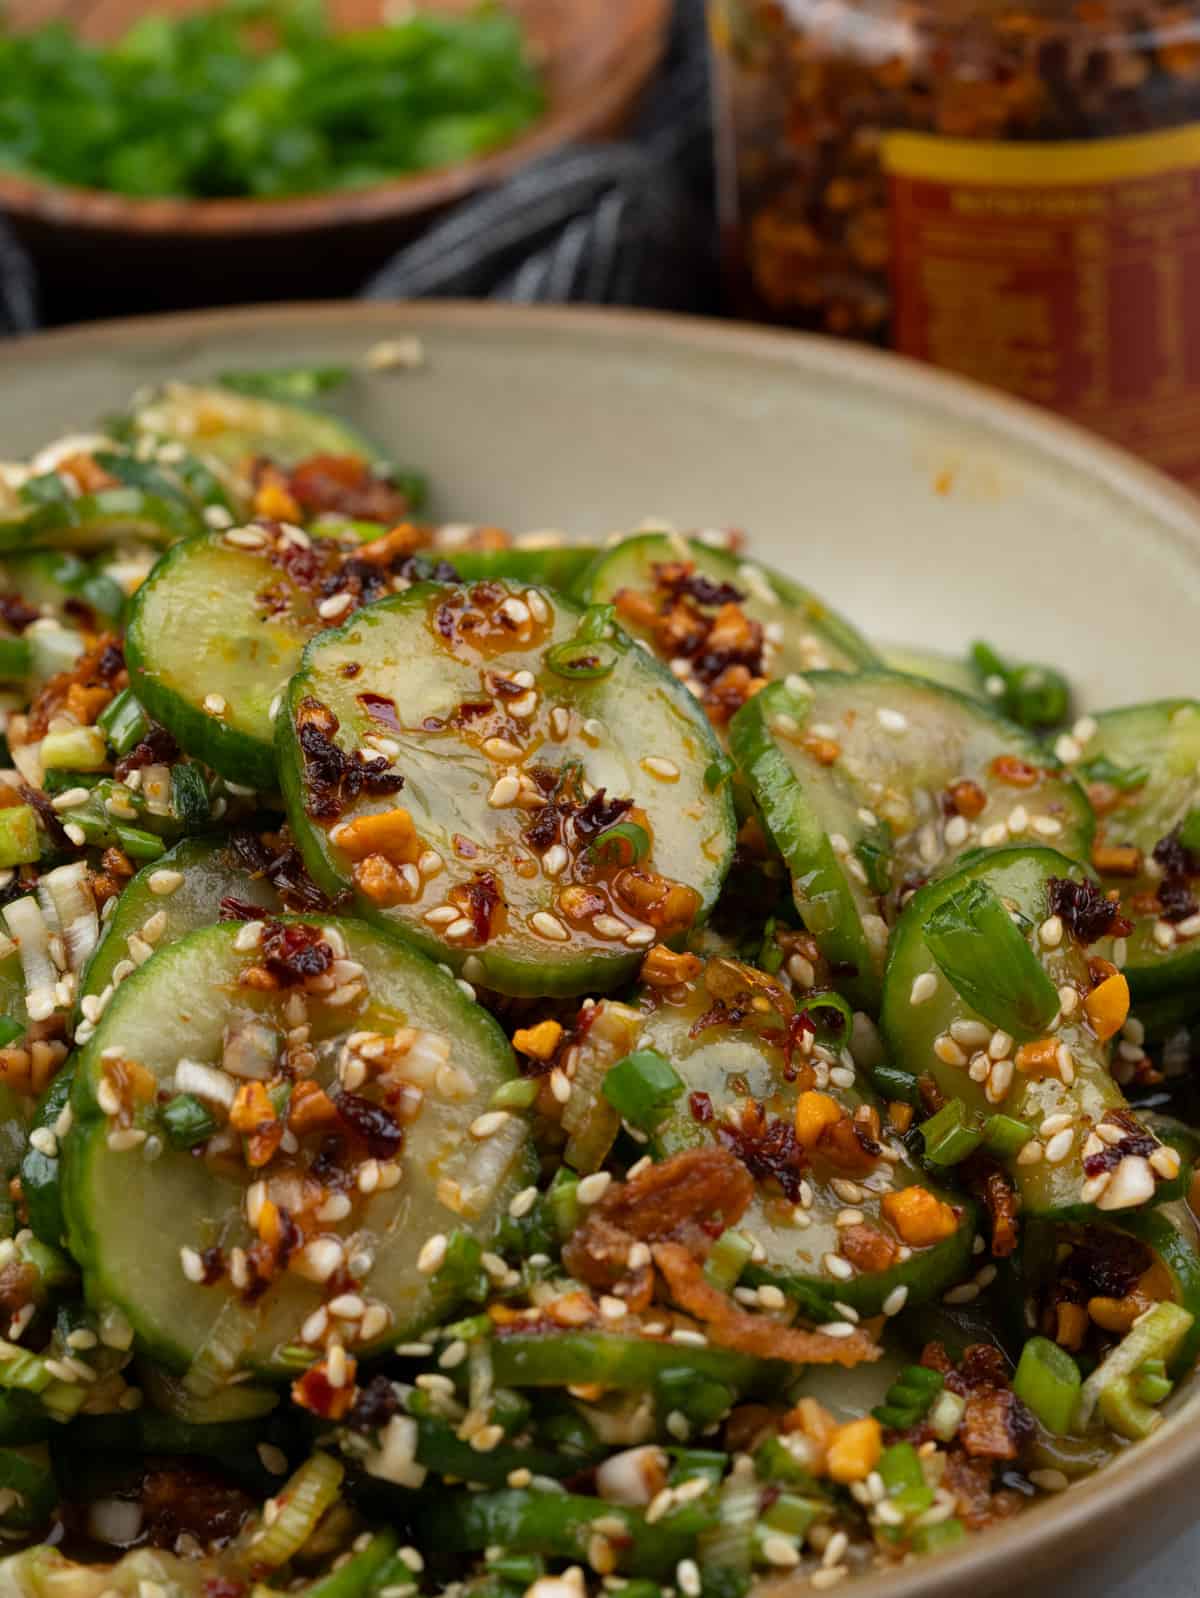 Asian salad dressing with sliced cucumber